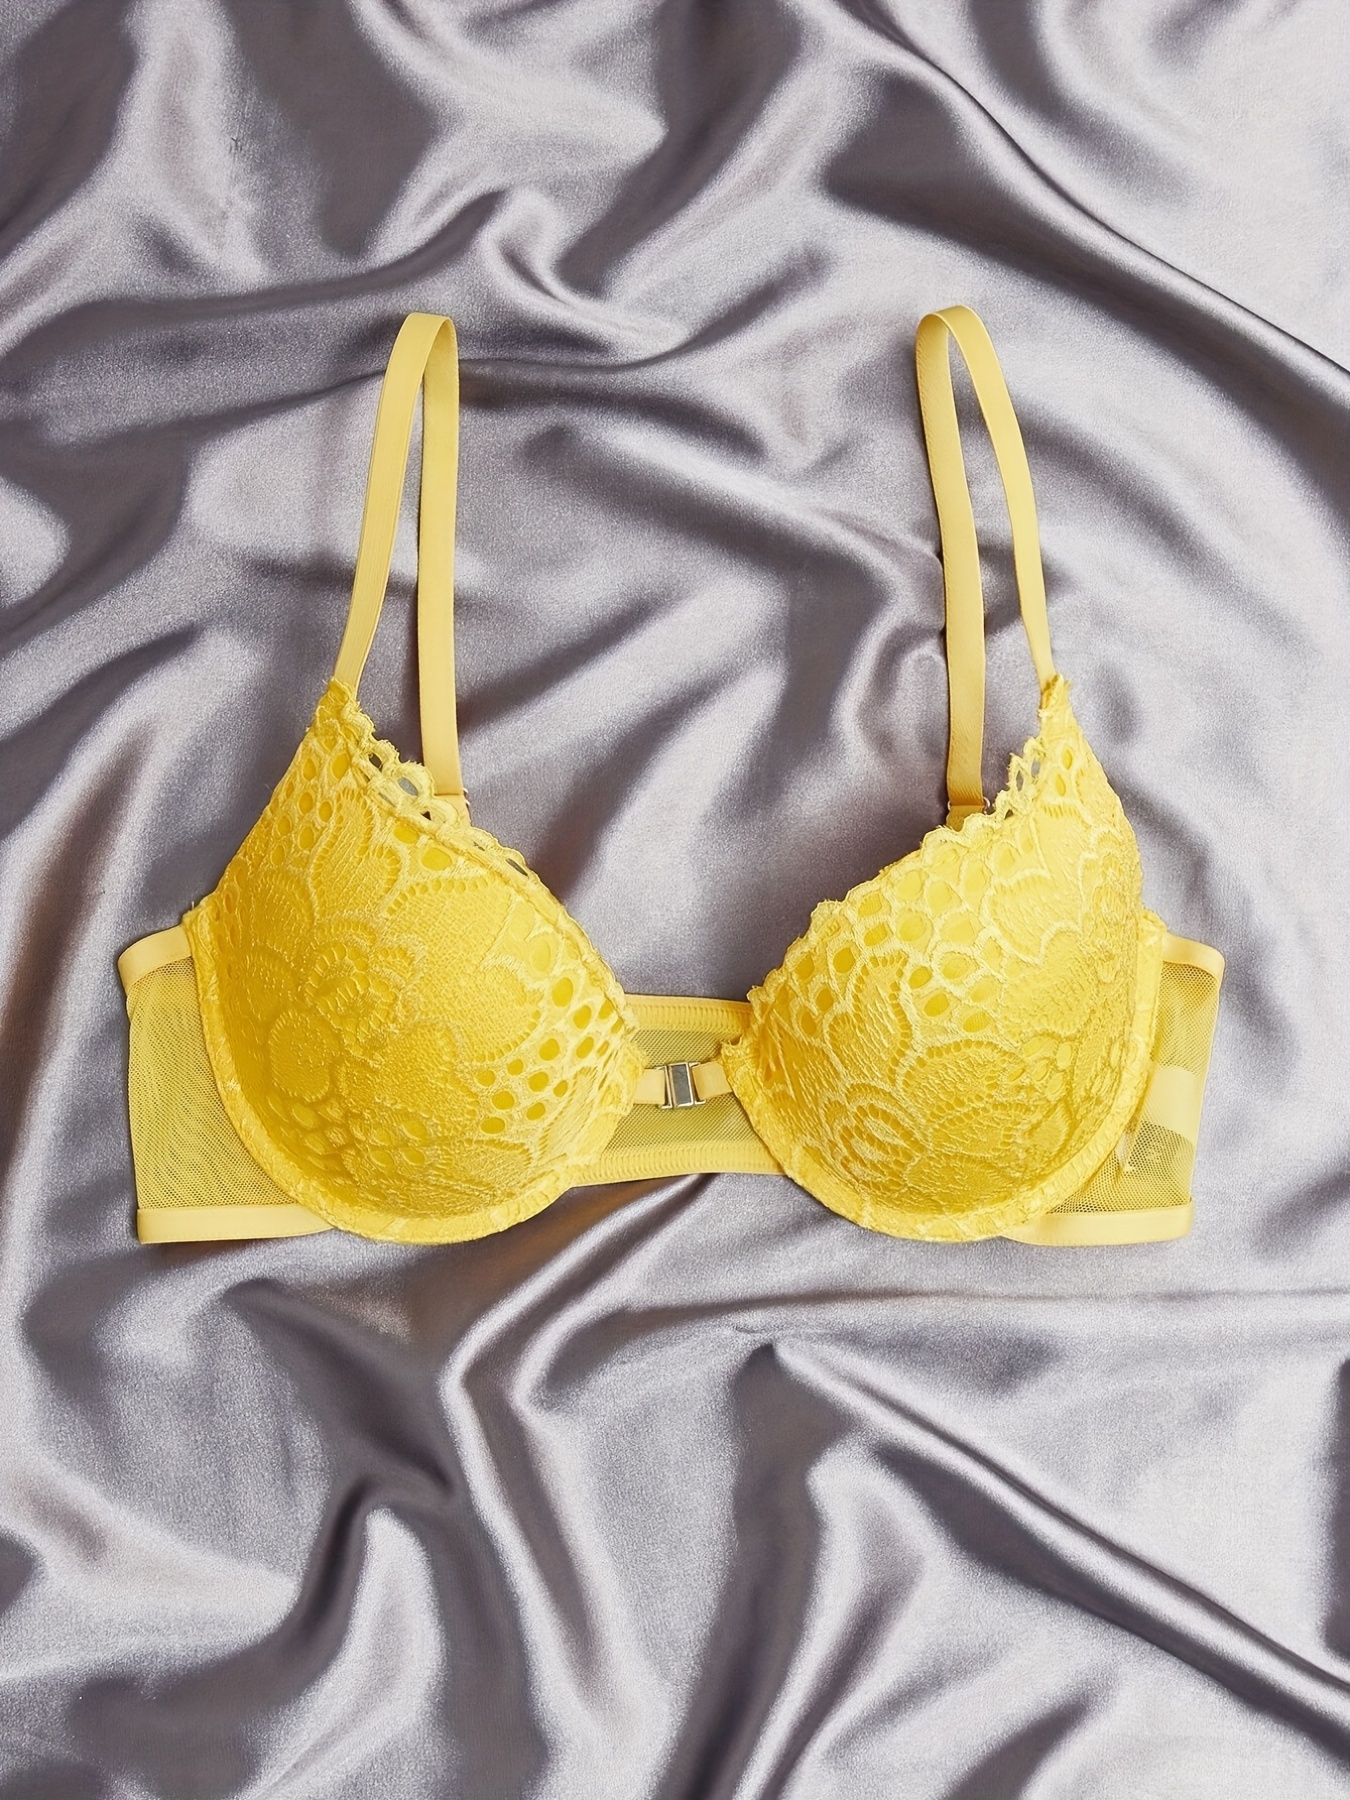 Pale Yellow Lace Push-Up Bra New Look, Compare